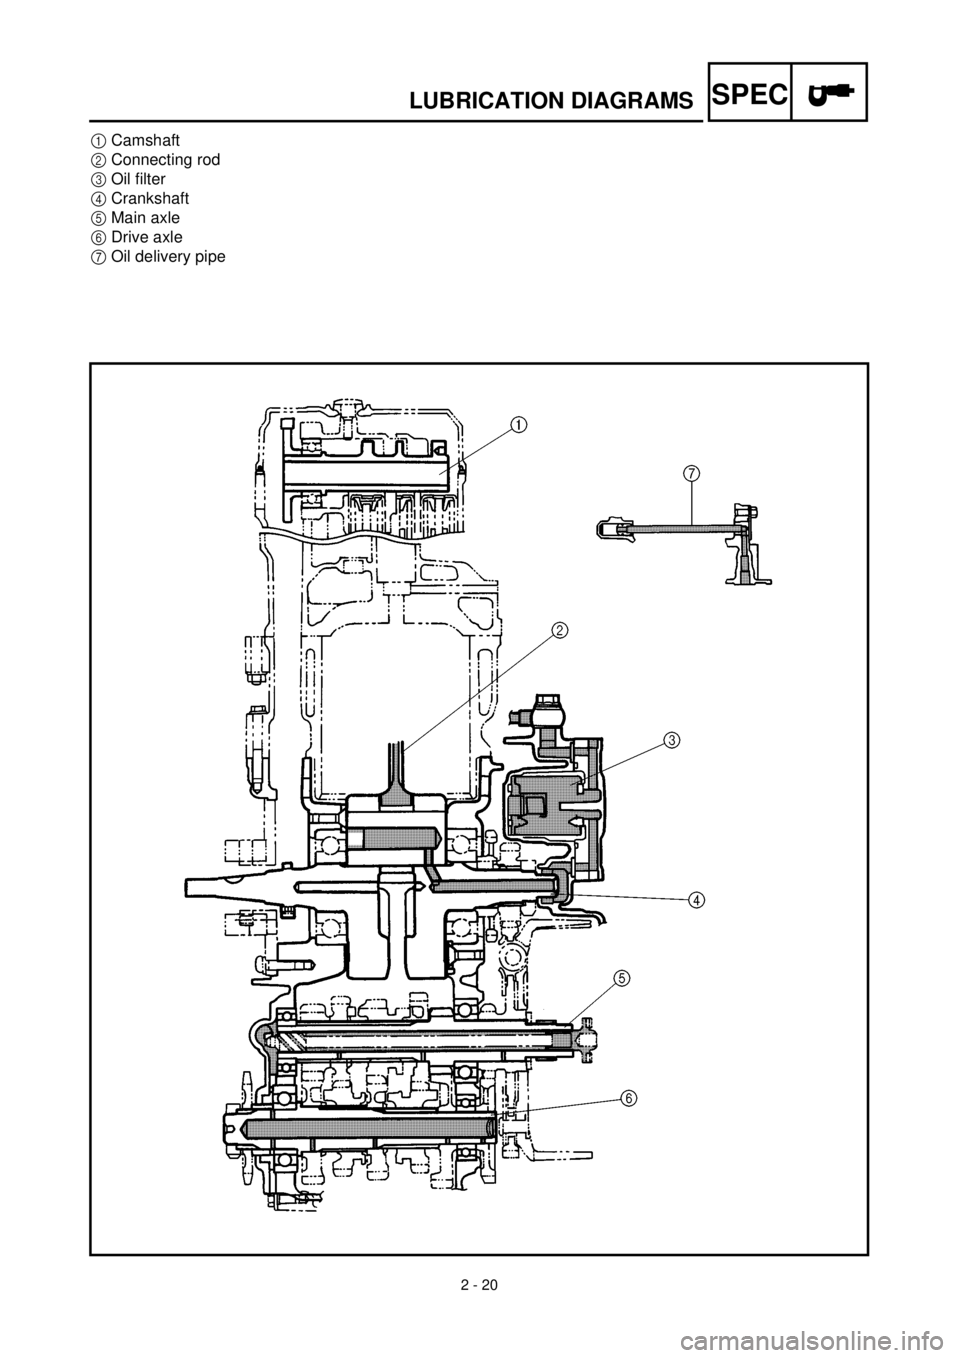 YAMAHA YZ426F 2000  Betriebsanleitungen (in German)  
2 - 20
SPEC
 
LUBRICATION DIAGRAMS 
1 
Camshaft 
2 
Connecting rod 
3 
Oil filter 
4 
Crankshaft 
5 
Main axle 
6 
Drive axle 
7 
Oil delivery pipe 